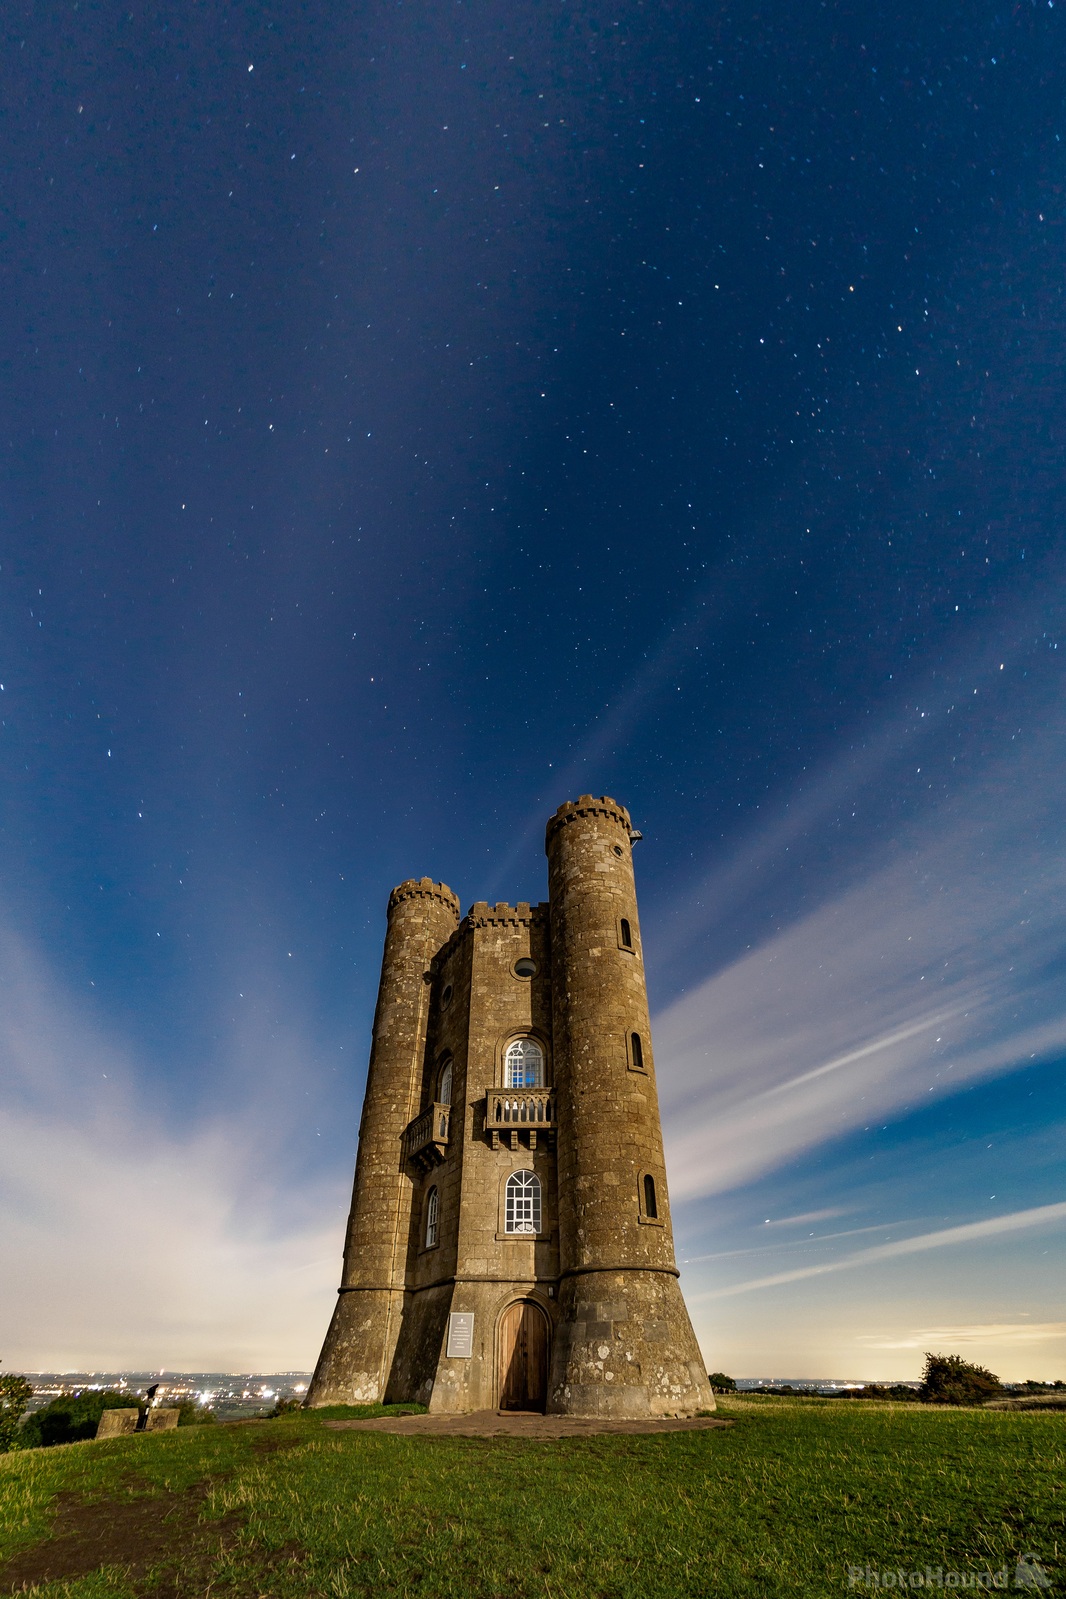 Image of Broadway Tower by Terence Rees